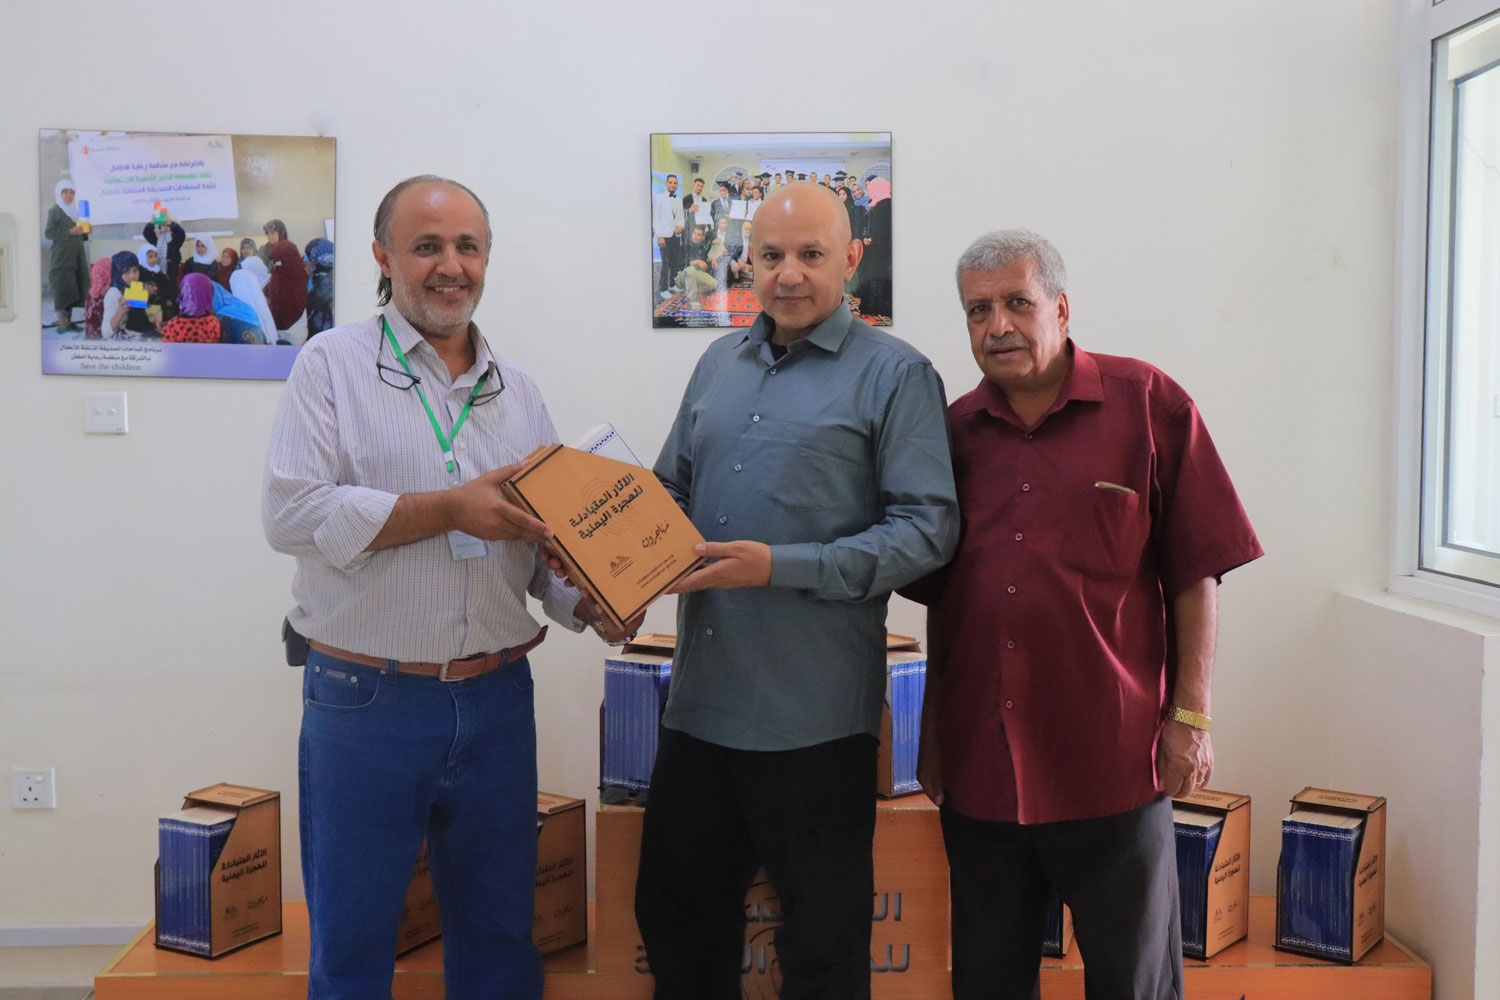 Dean of the Yemeni Community in Liverpool Receives the Study of Yemeni Migration- Reciprocal Impacts